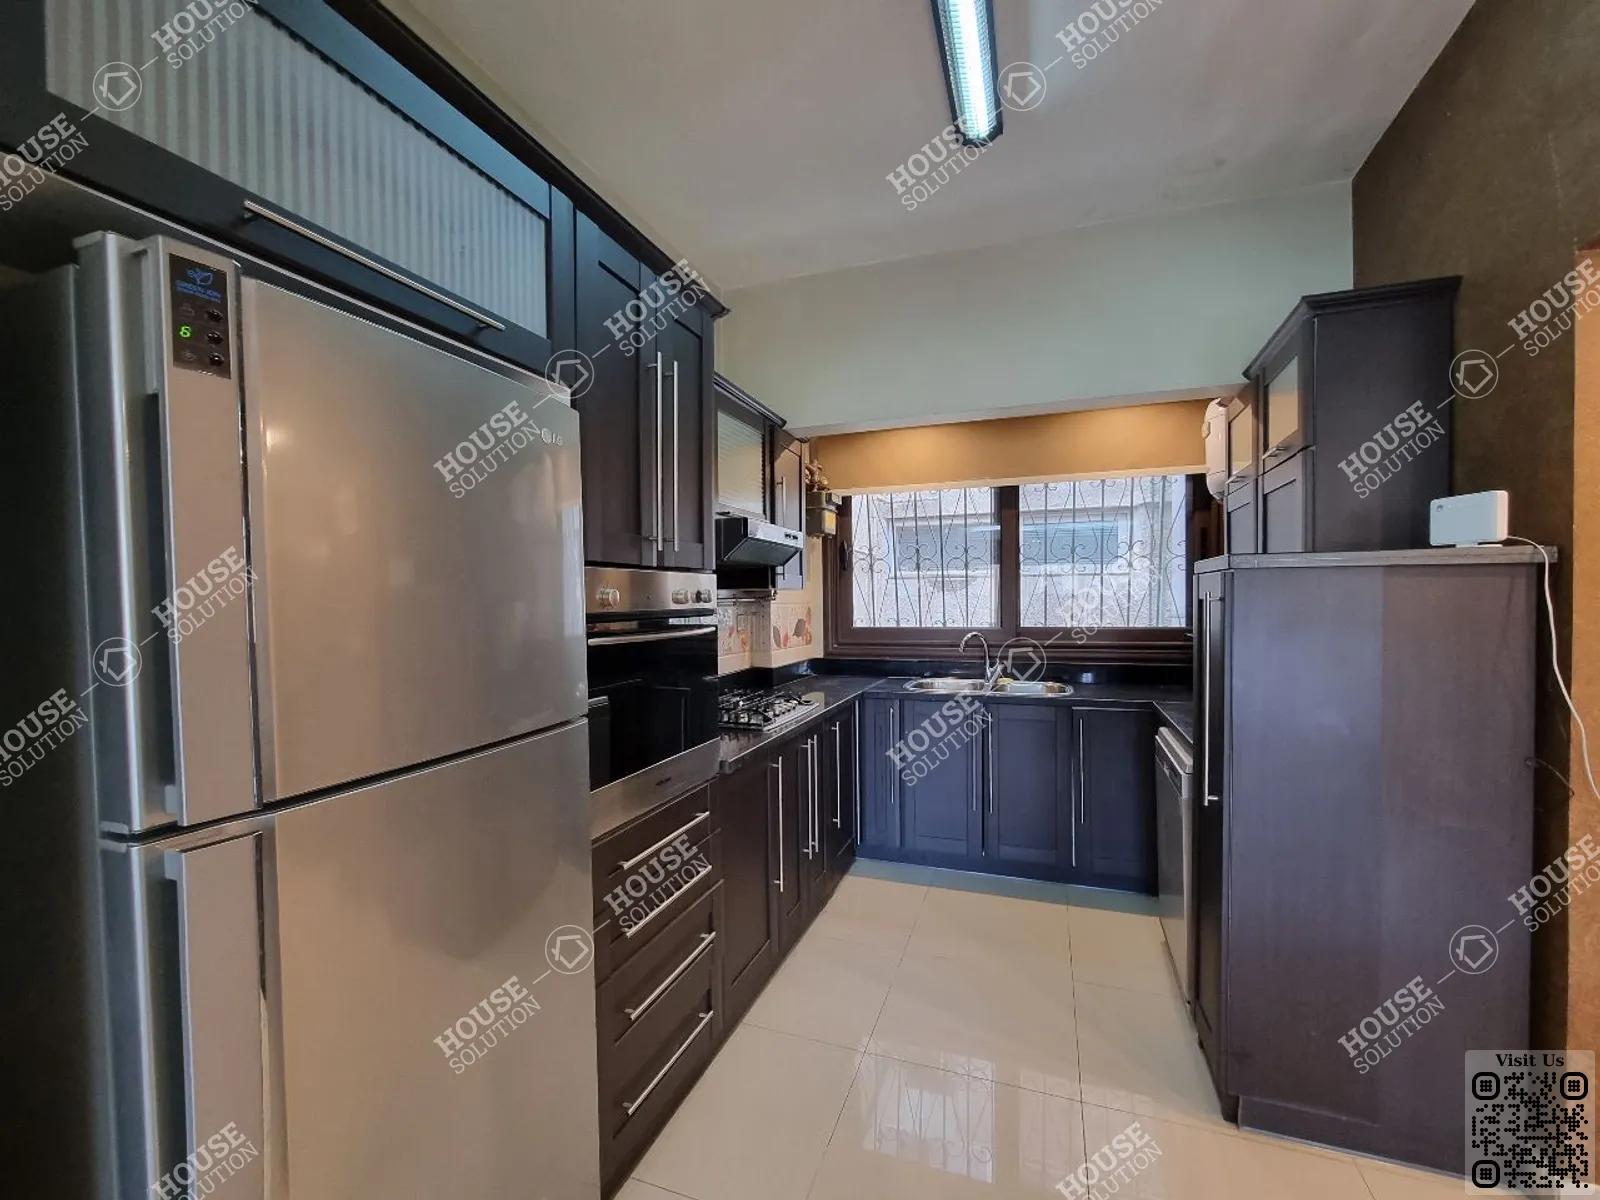 KITCHEN  @ Apartments For Rent In Maadi Maadi Sarayat Area: 160 m² consists of 2 Bedrooms 2 Bathrooms Modern furnished 5 stars #3550-1